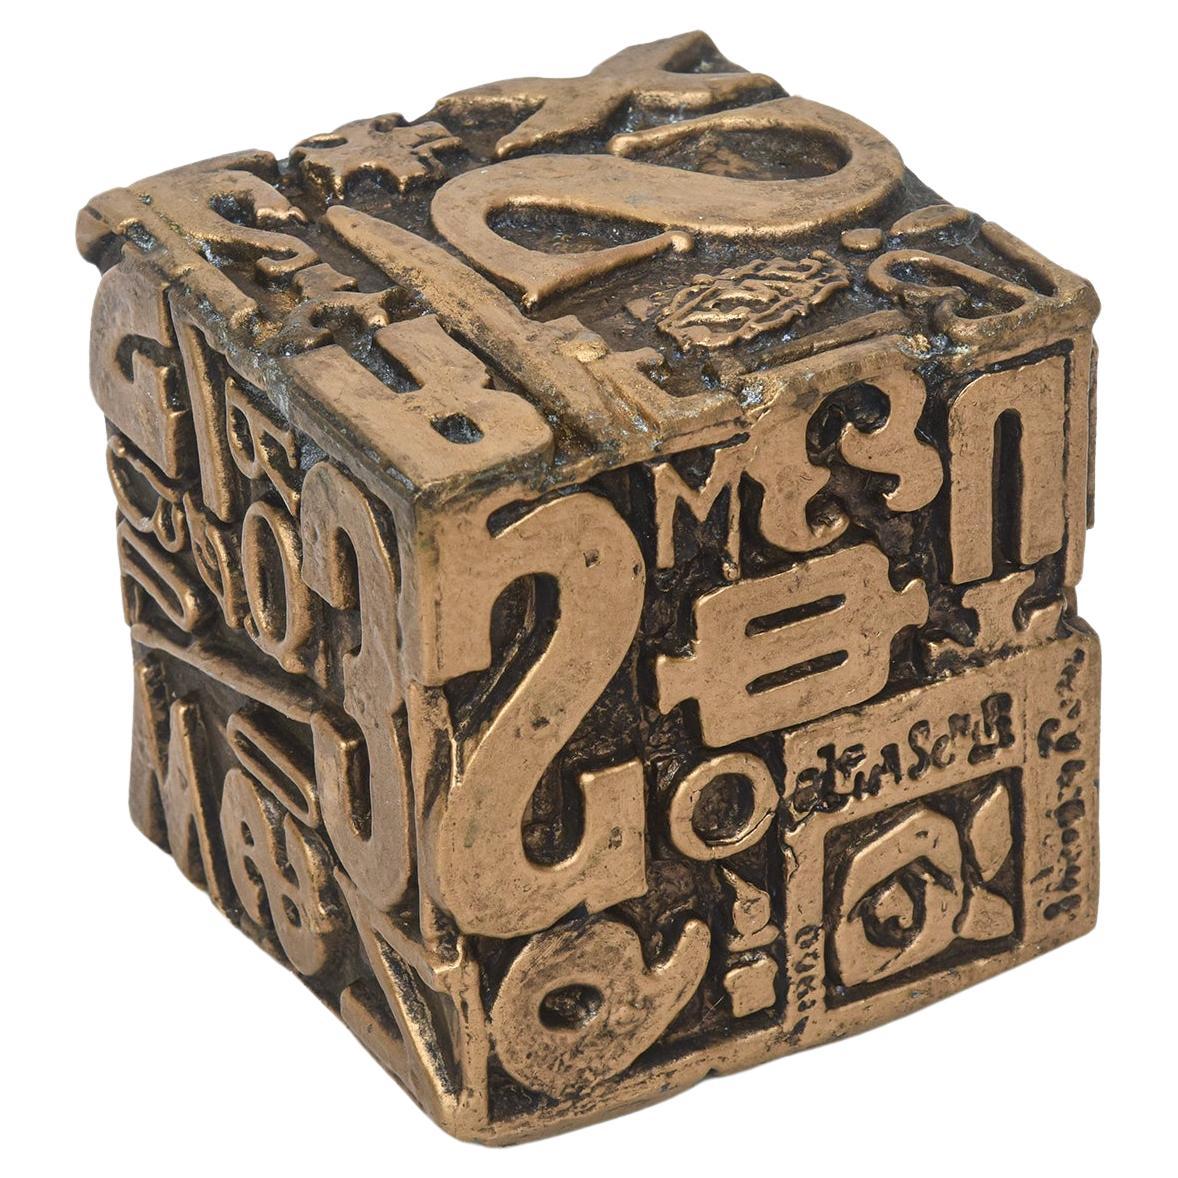 Vintage Sheldon Rose Alpha Typographic Cube Sculpture Mixed Media For Sale